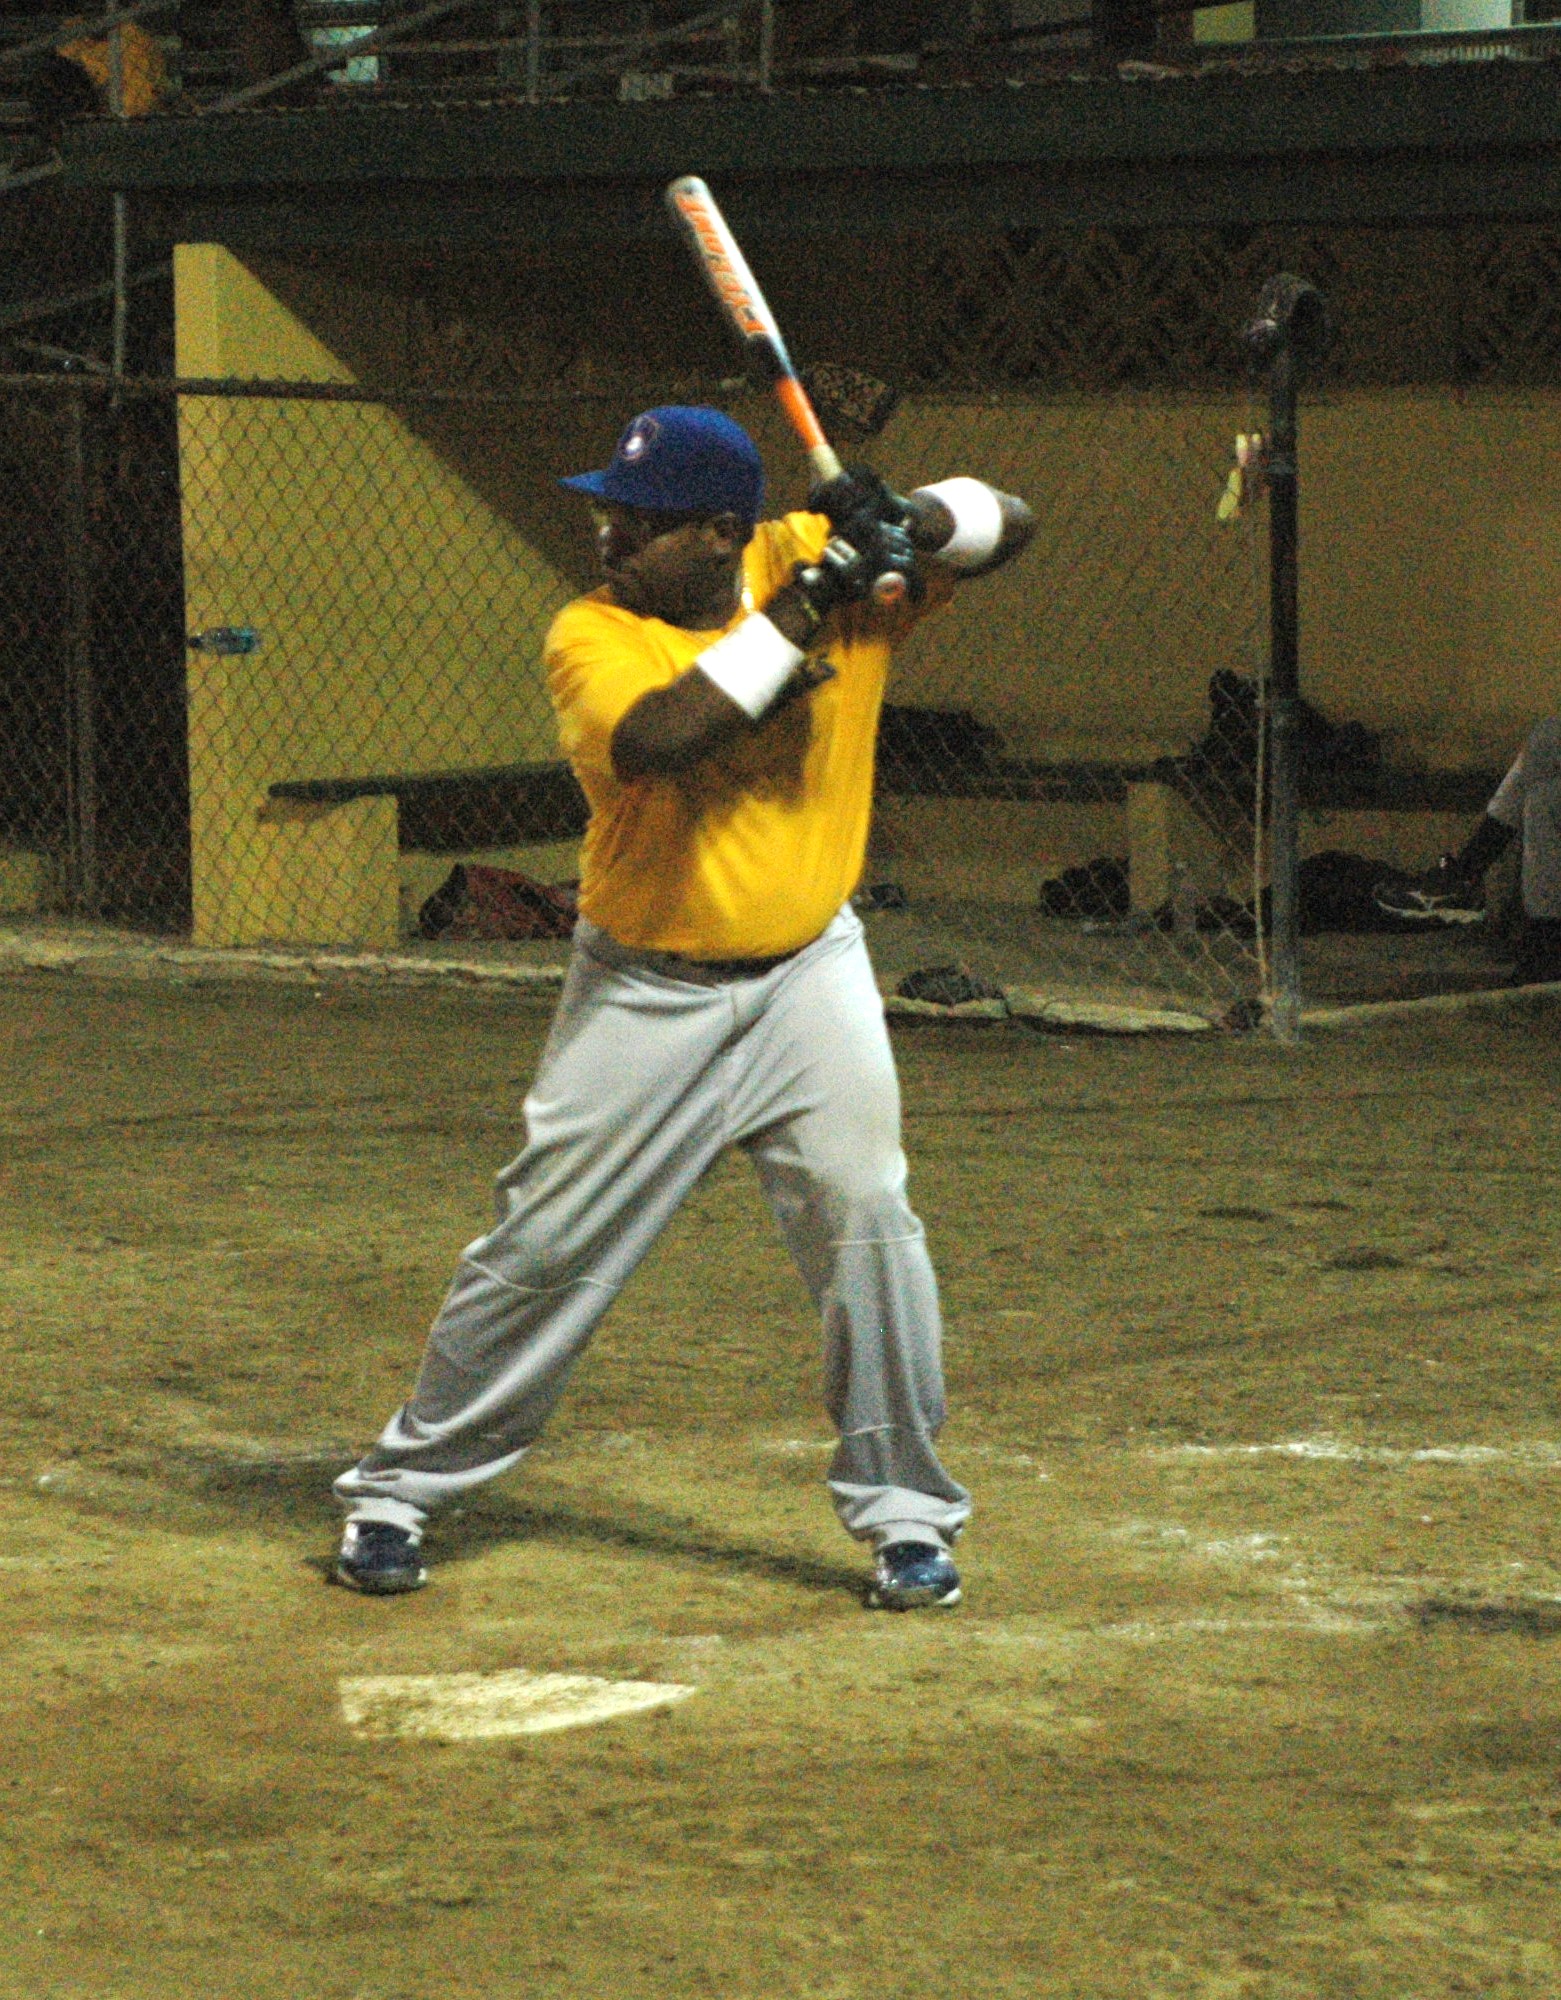 Injectables won Tuesday's game but lost their big bat,Rashawn “Rocky” Foster, to a knee injury.